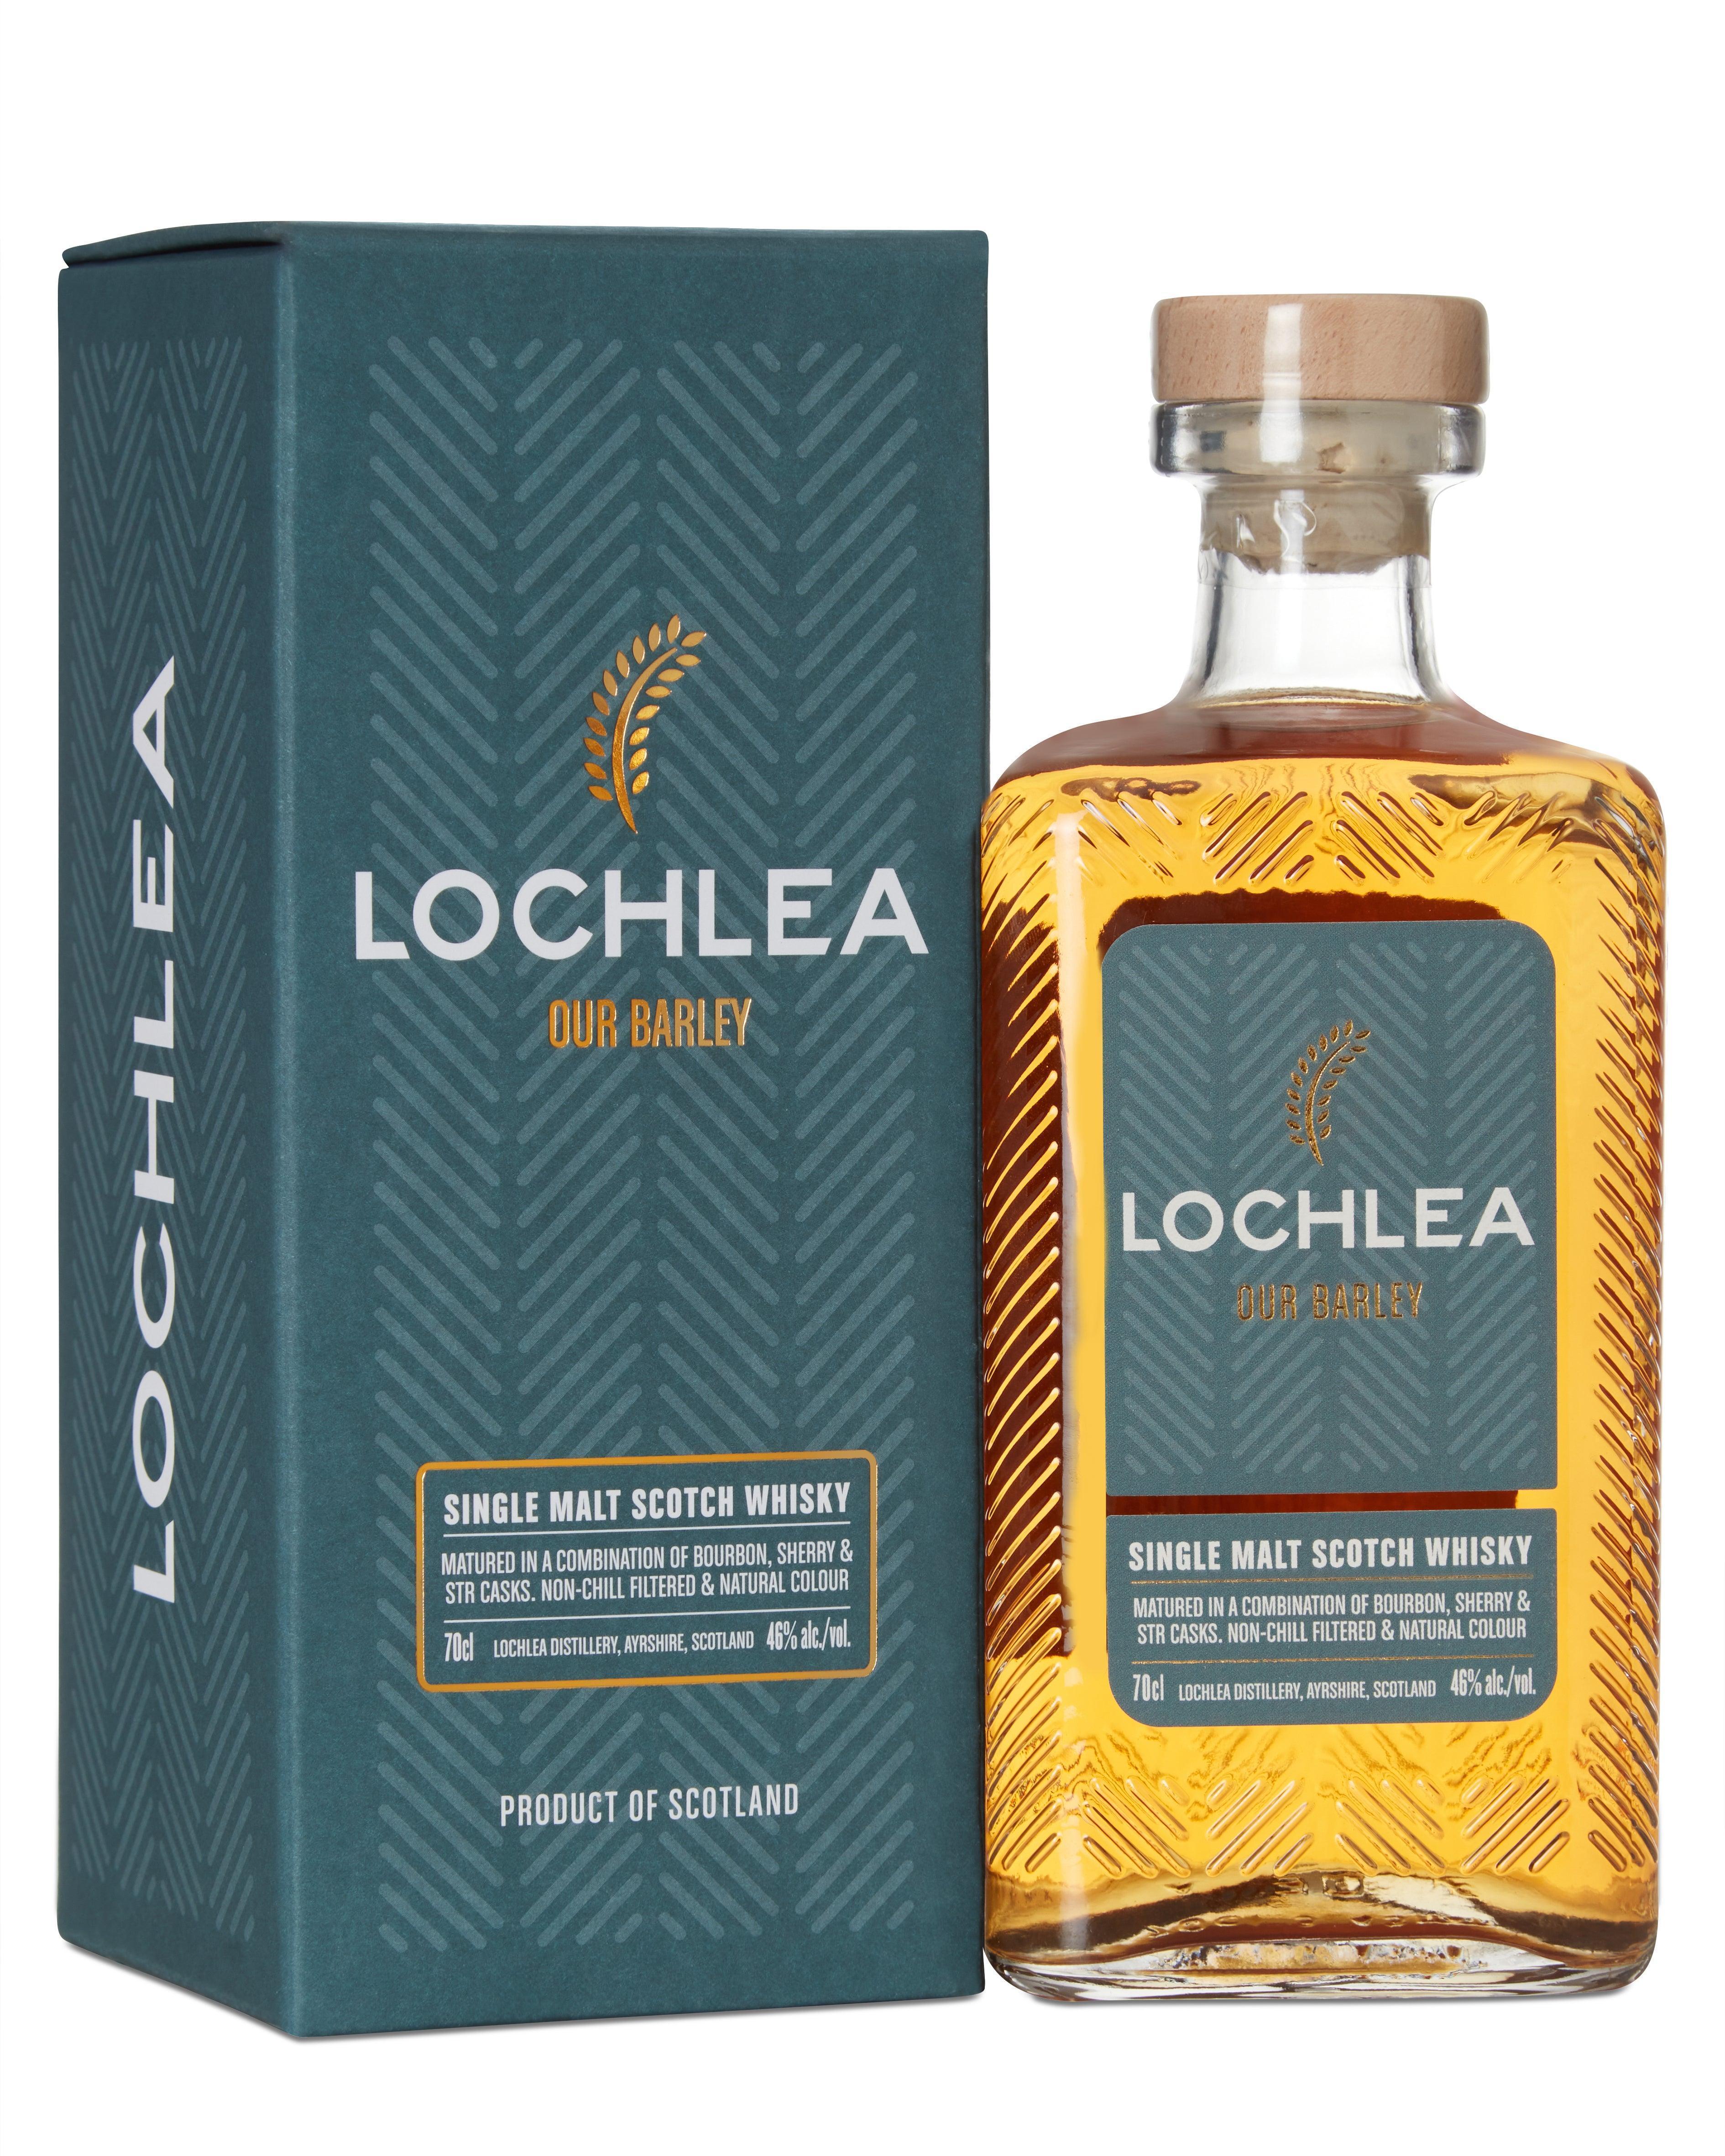 Lochlea, Our Barley Whisky